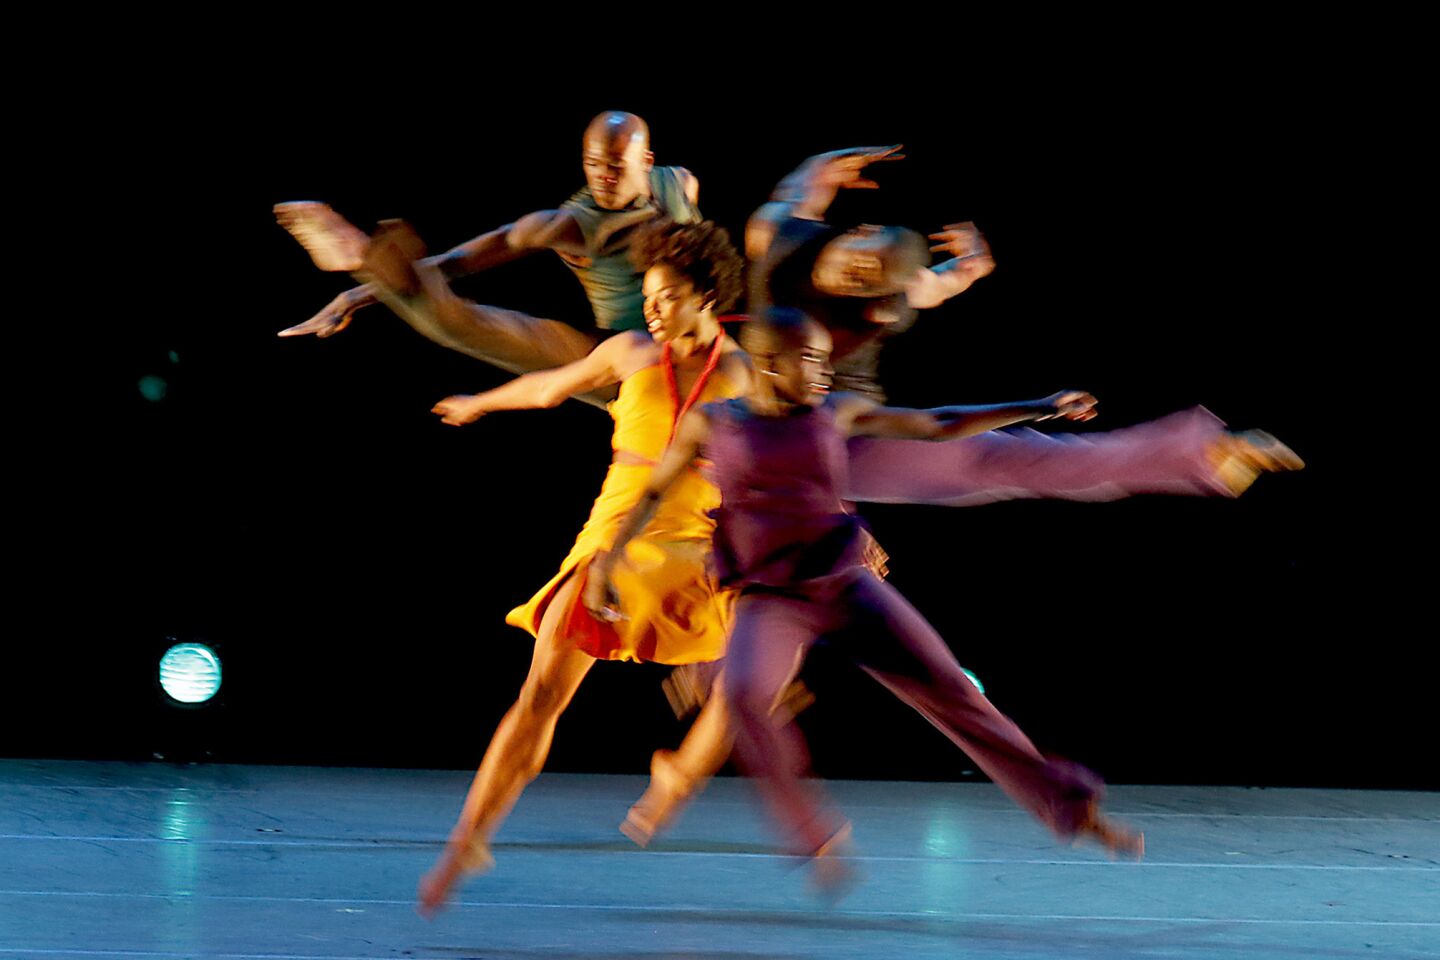 Arts and culture in pictures by The Times | Alvin Ailey American Dance Theater